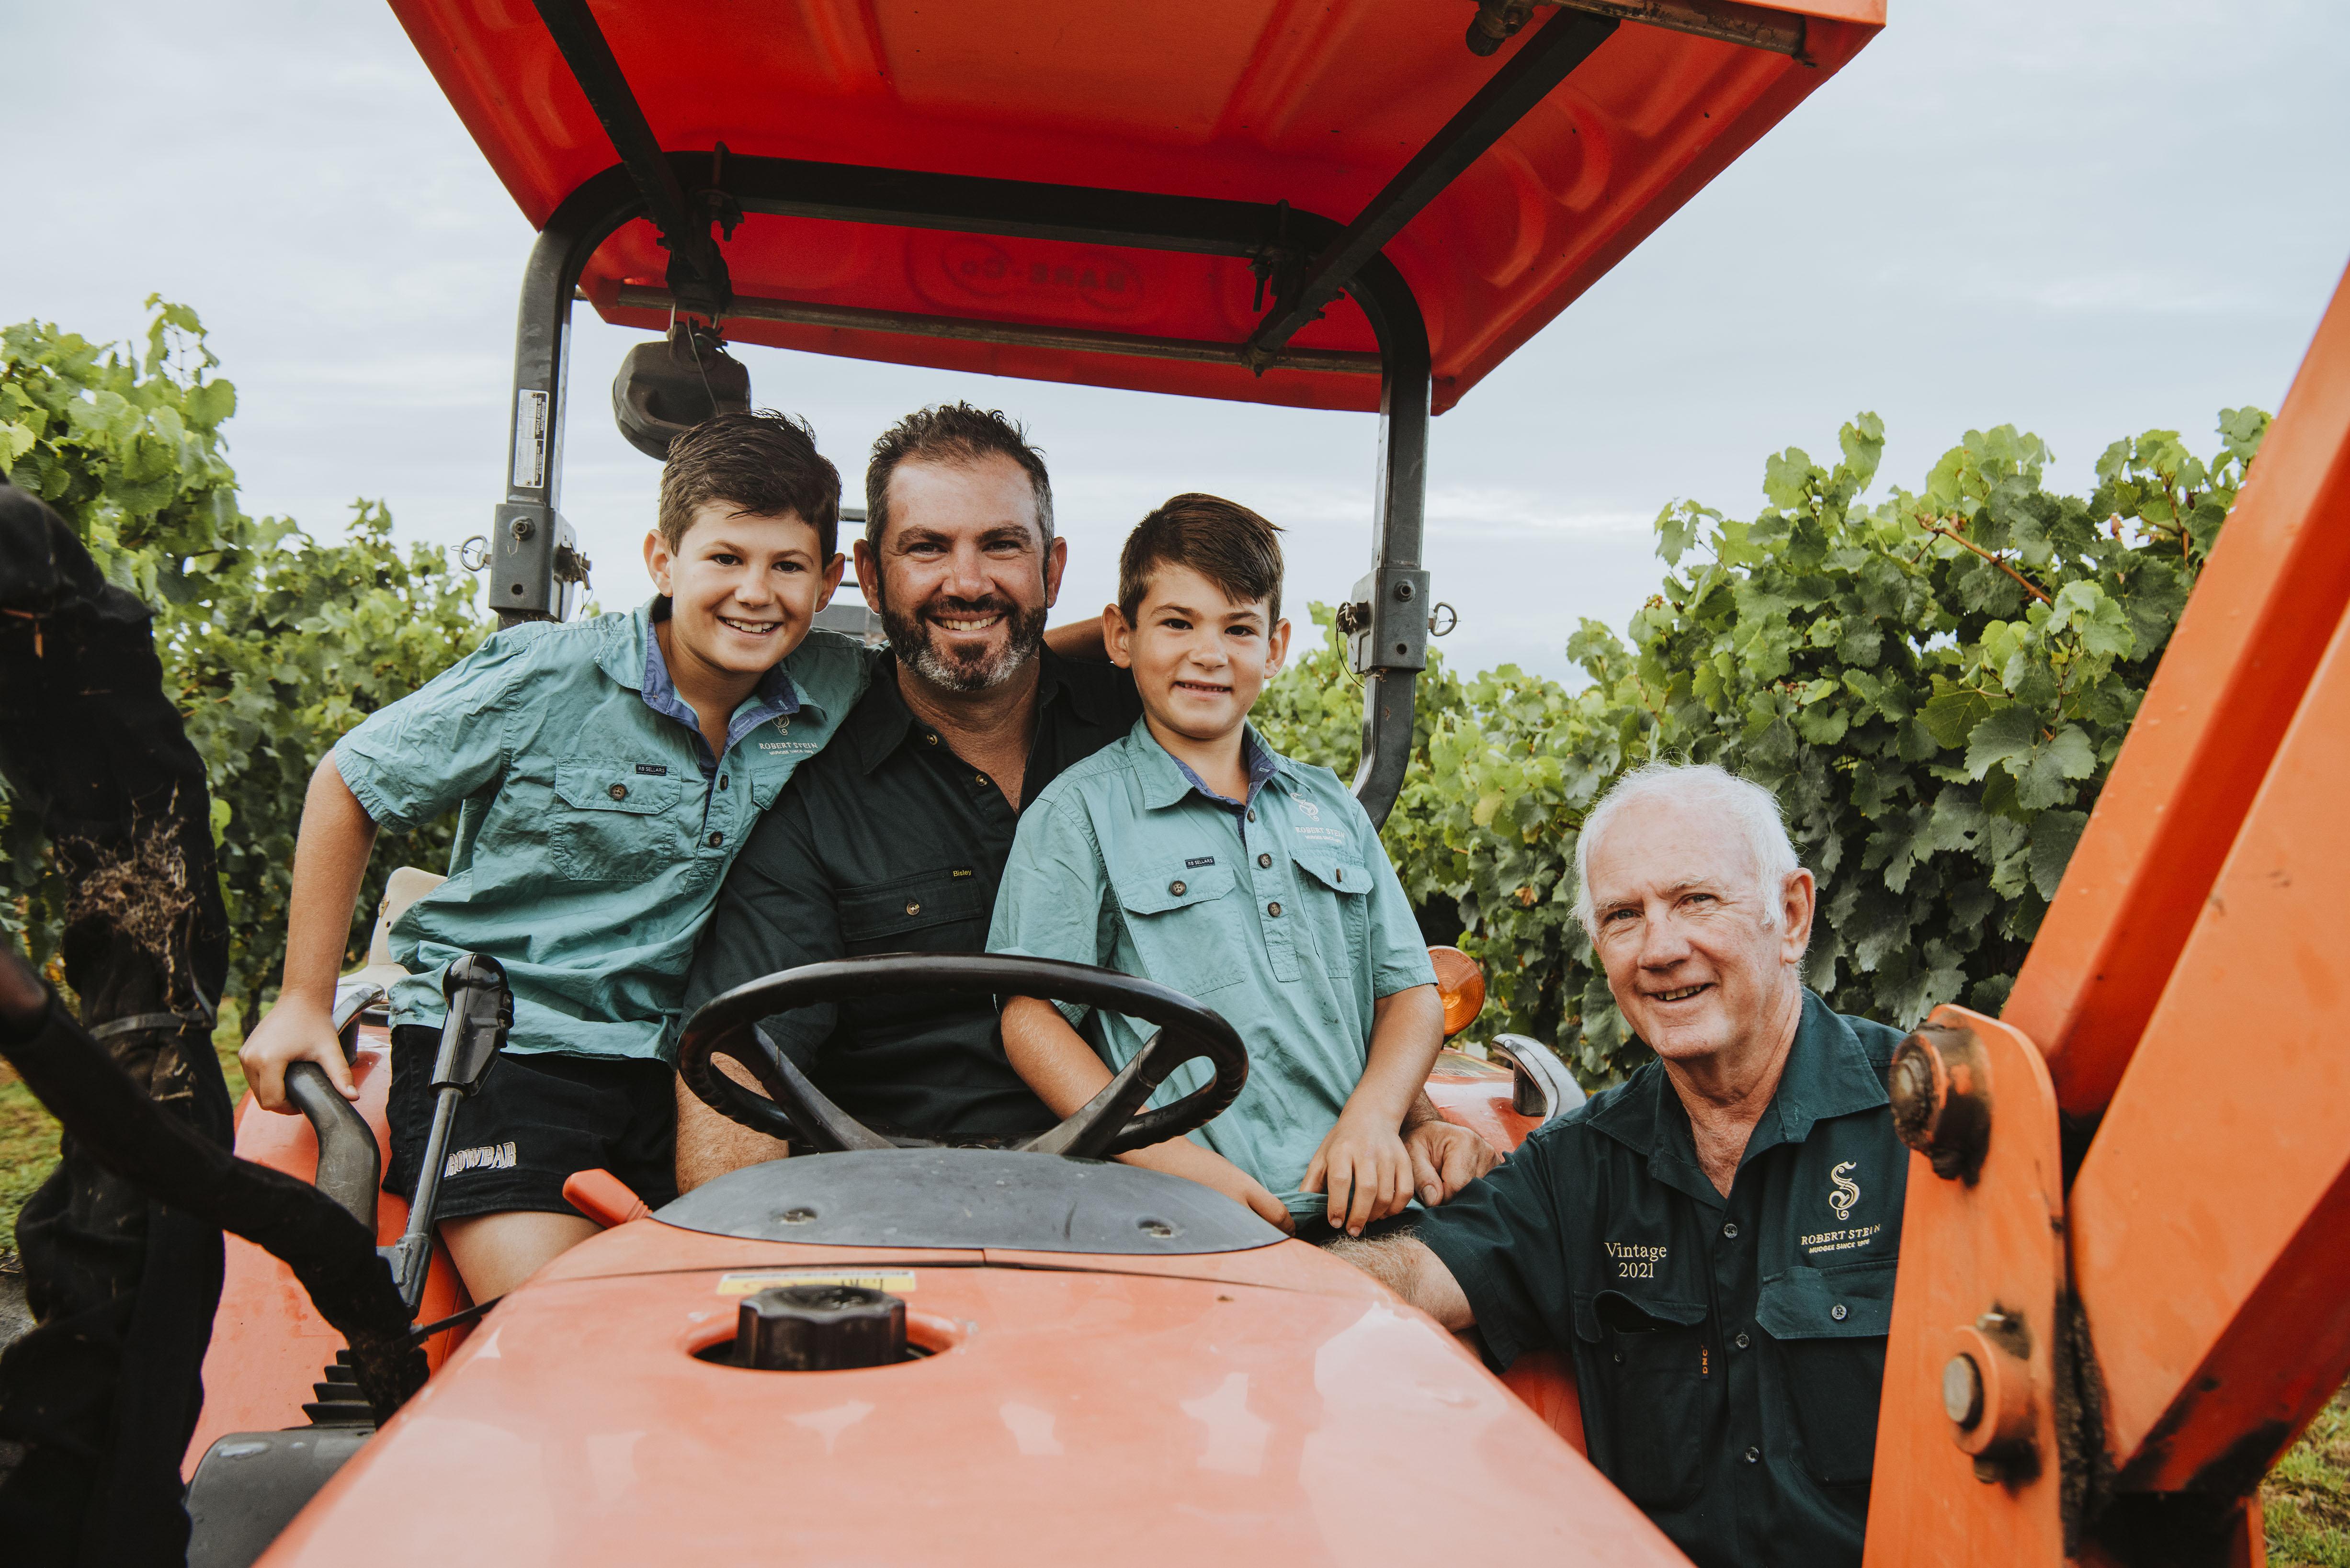 Two boys and two men on the tractor in the vineyard